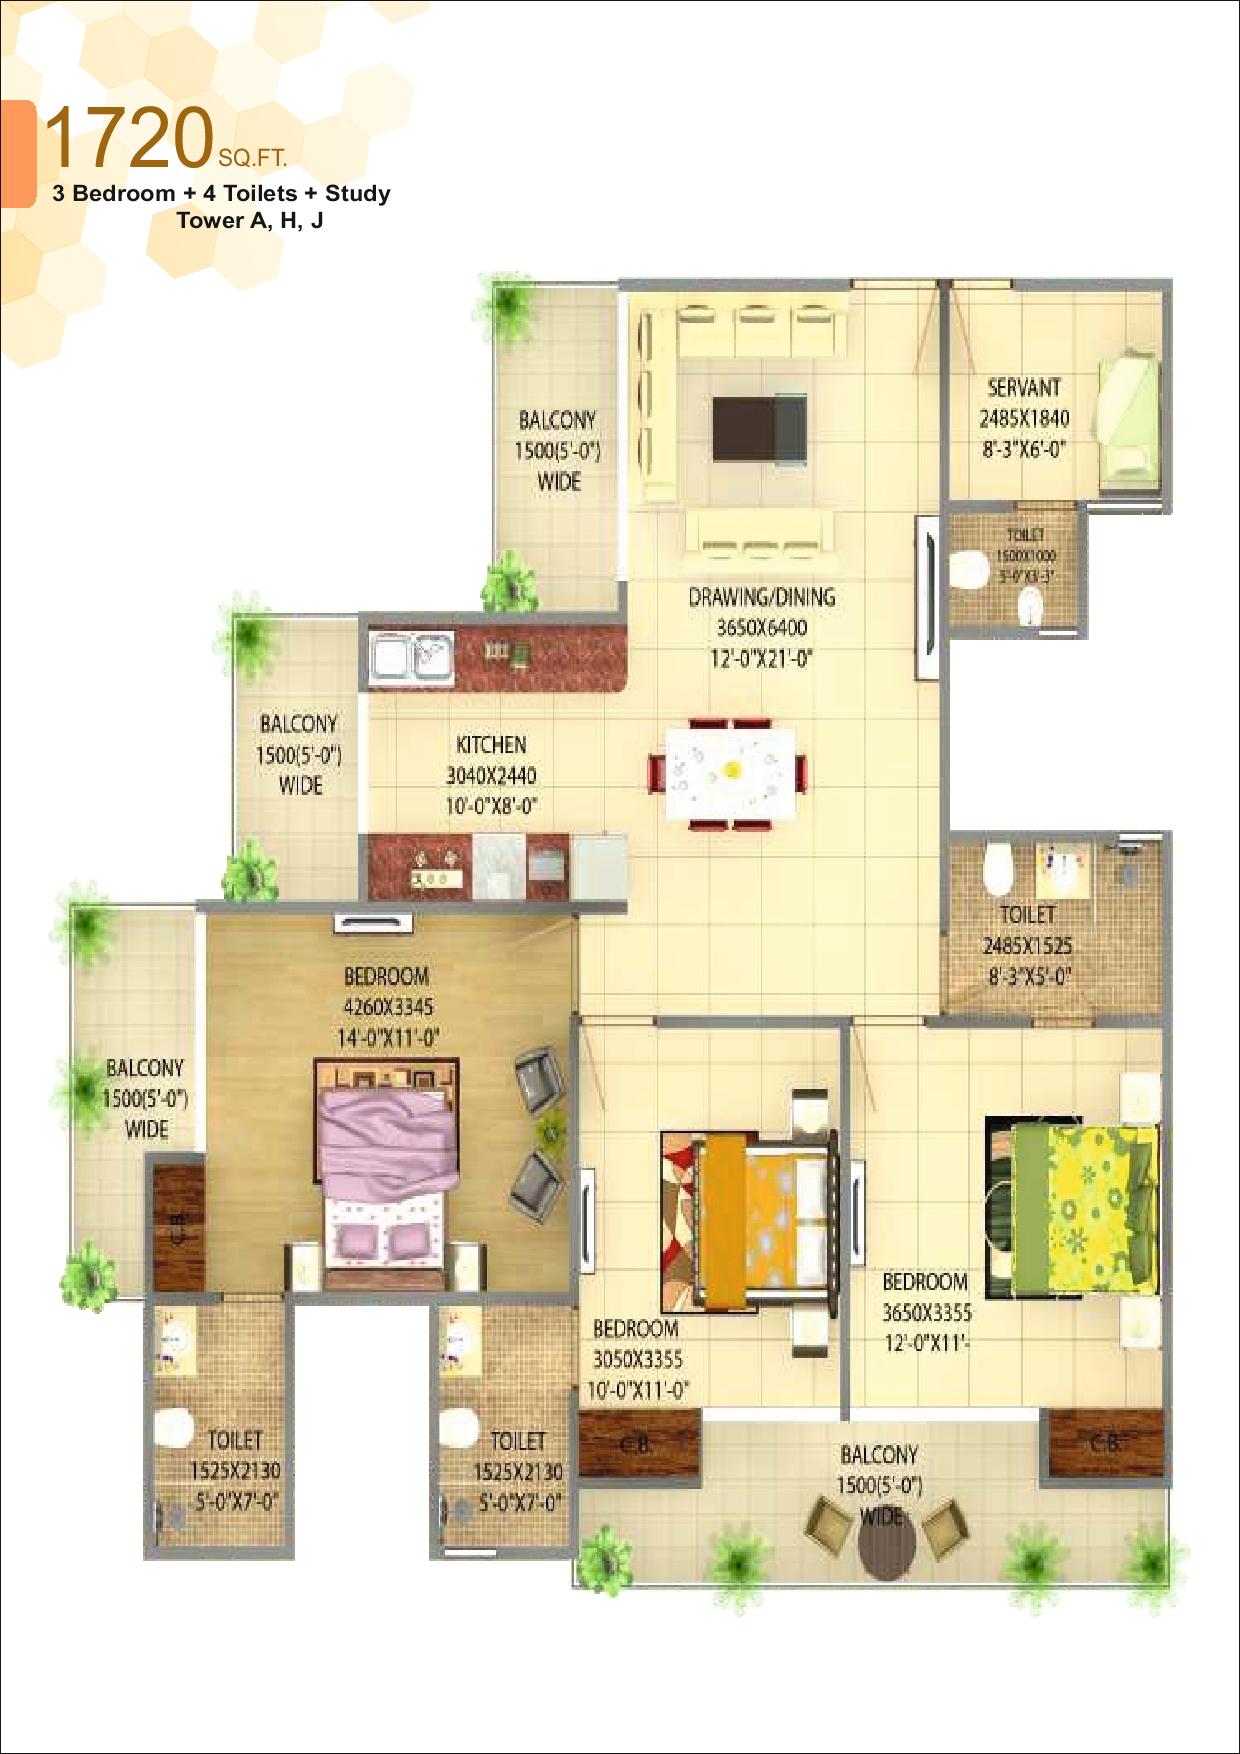 3BHK+4T+1S 1720 Sq.Ft